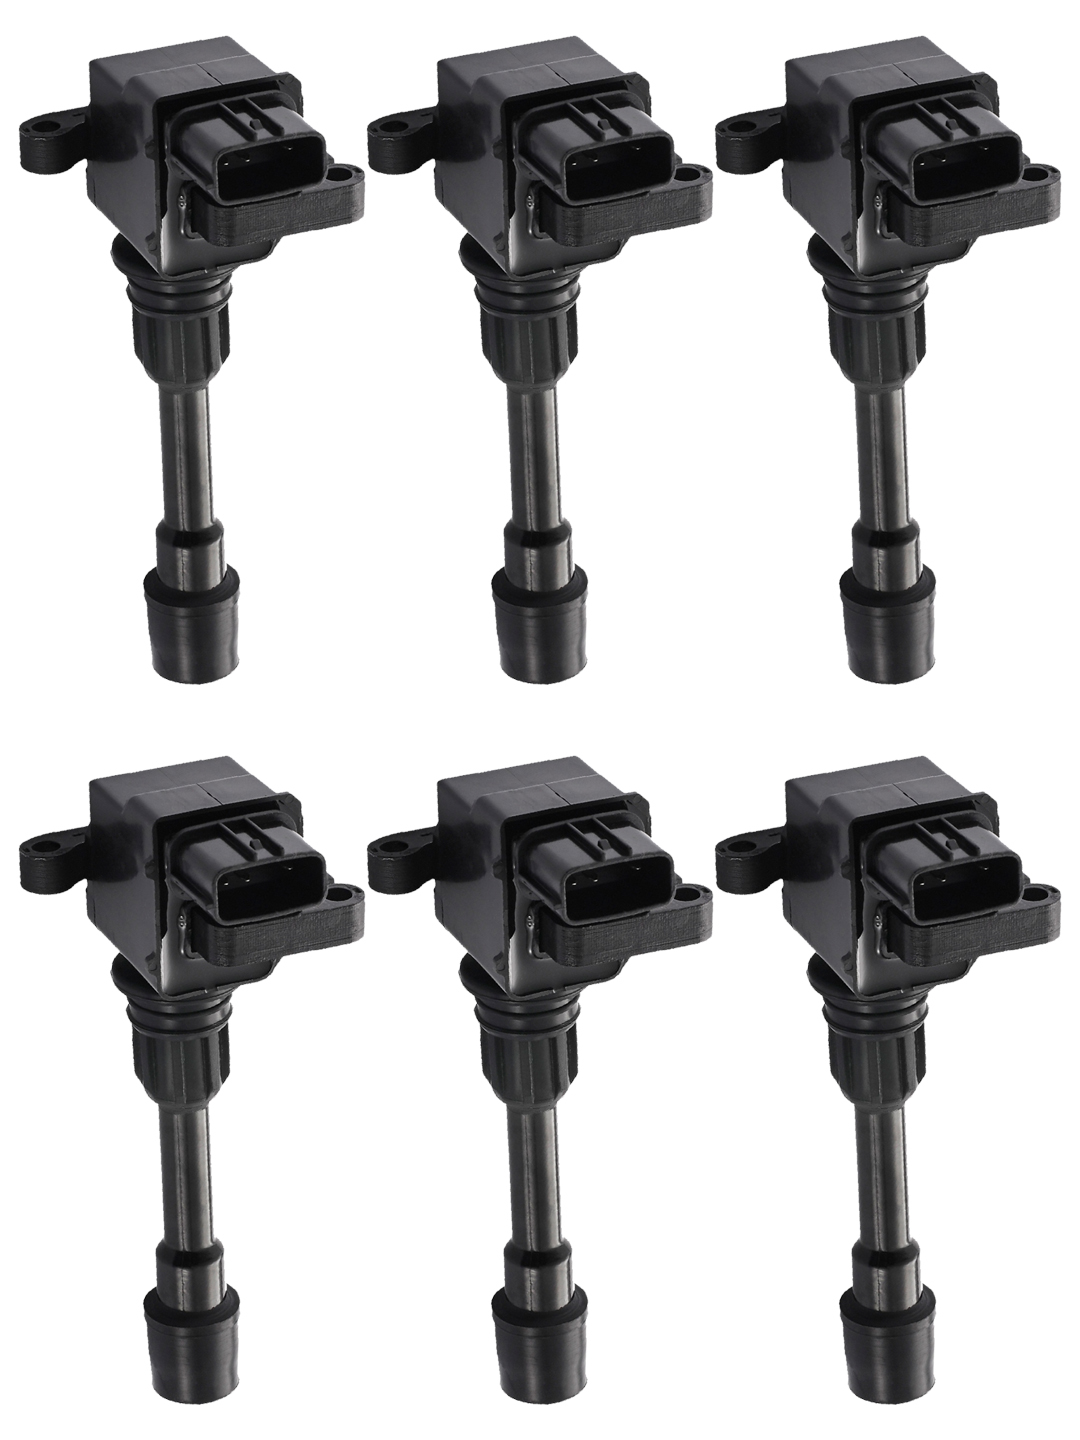 Set of 6 Ignition Coils Compatible with 1999 Mazda Millenia 2.3L V6 Replacement for UF151 C1012 (3-pin coil plug) - image 1 of 5